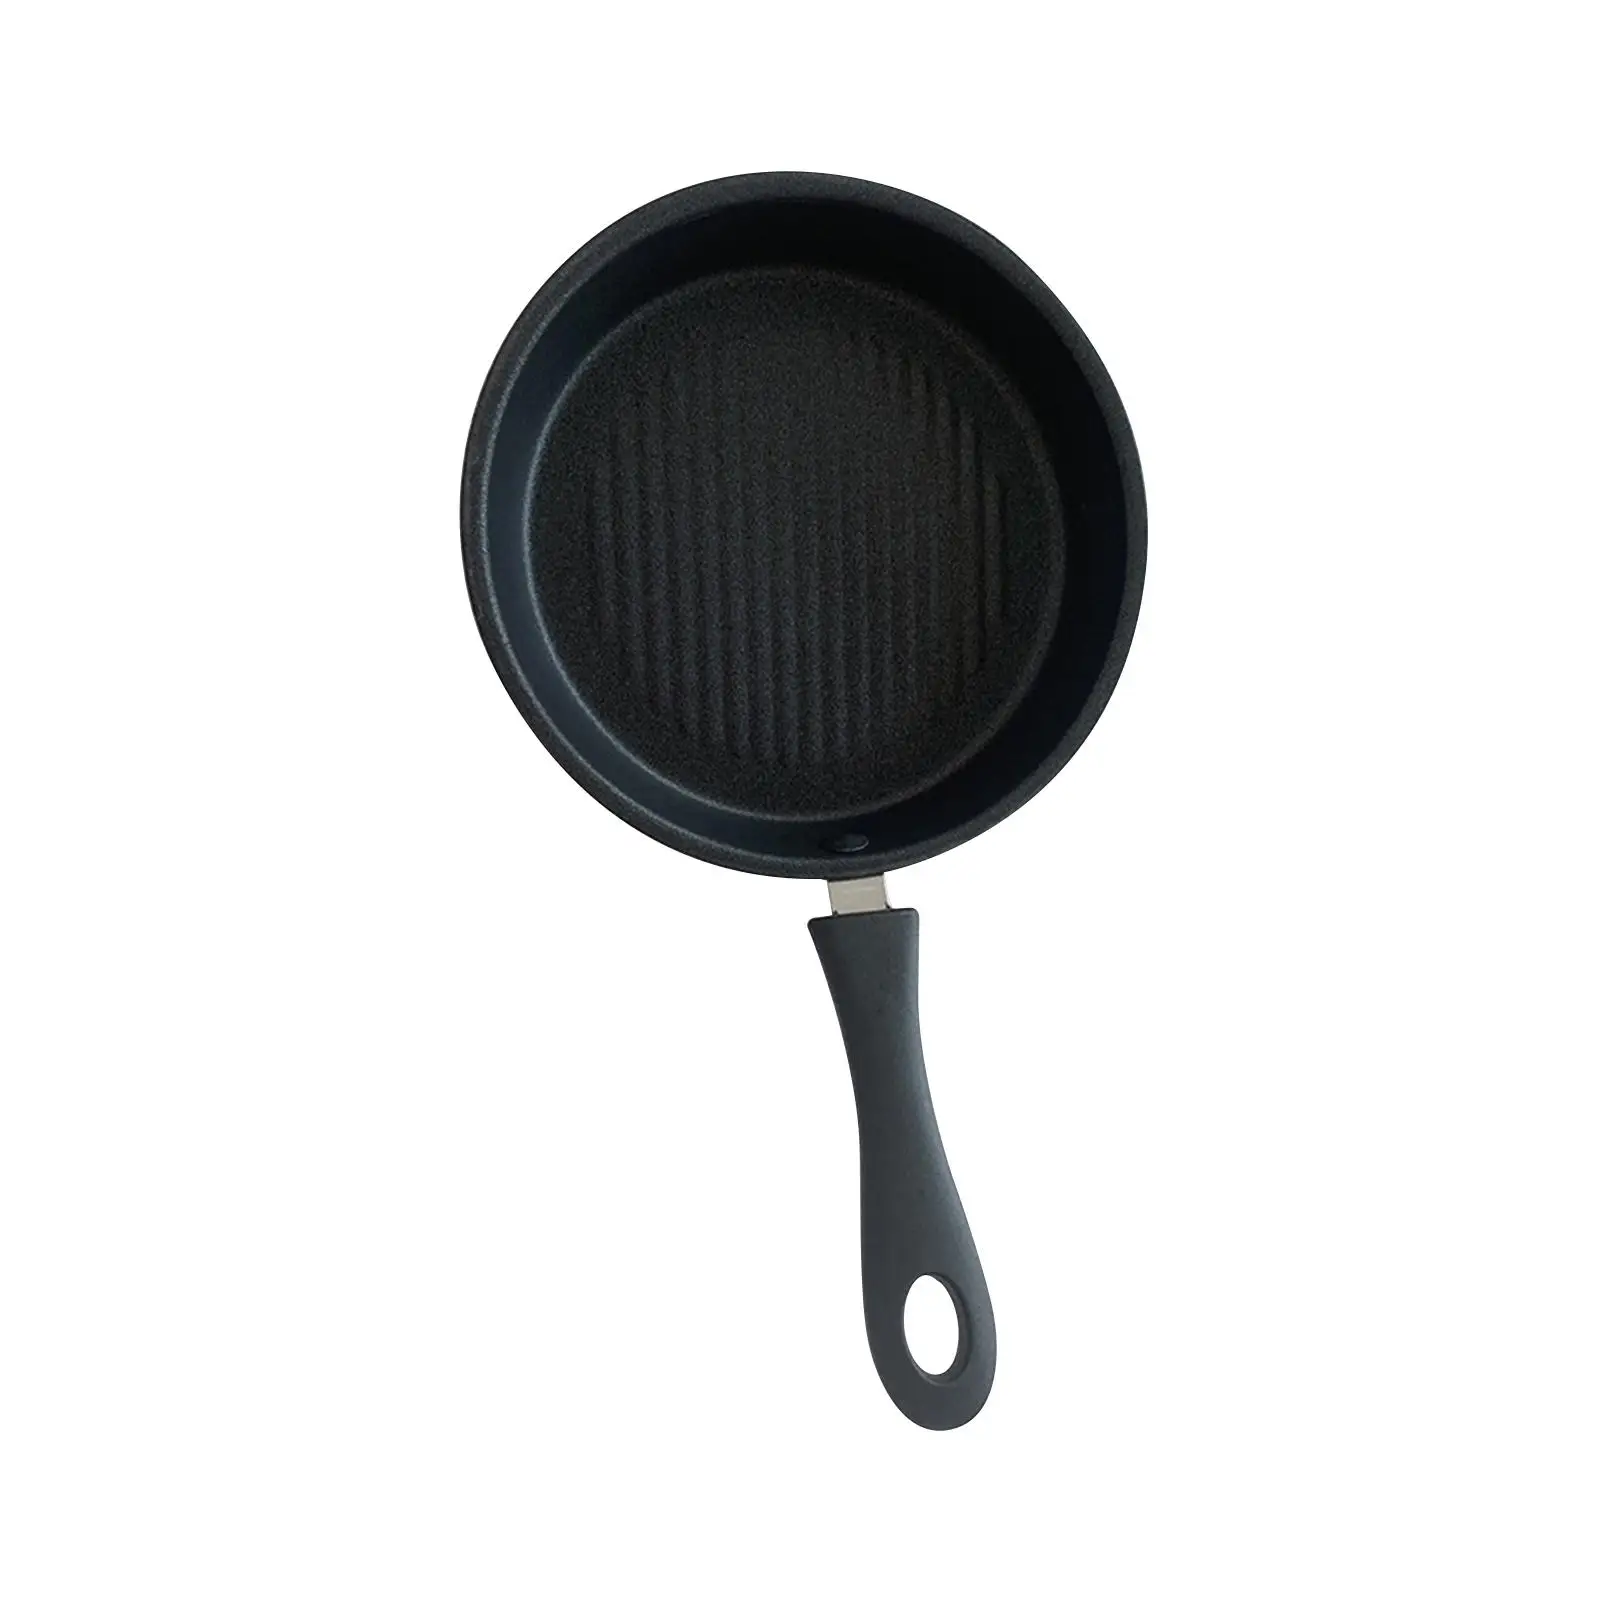 Grill Pan Nonstick Surface Frying Cookware Stripe Frying Pan Steak Pan Griddle Pan for Steak Meats Vegetables Picnic Camping